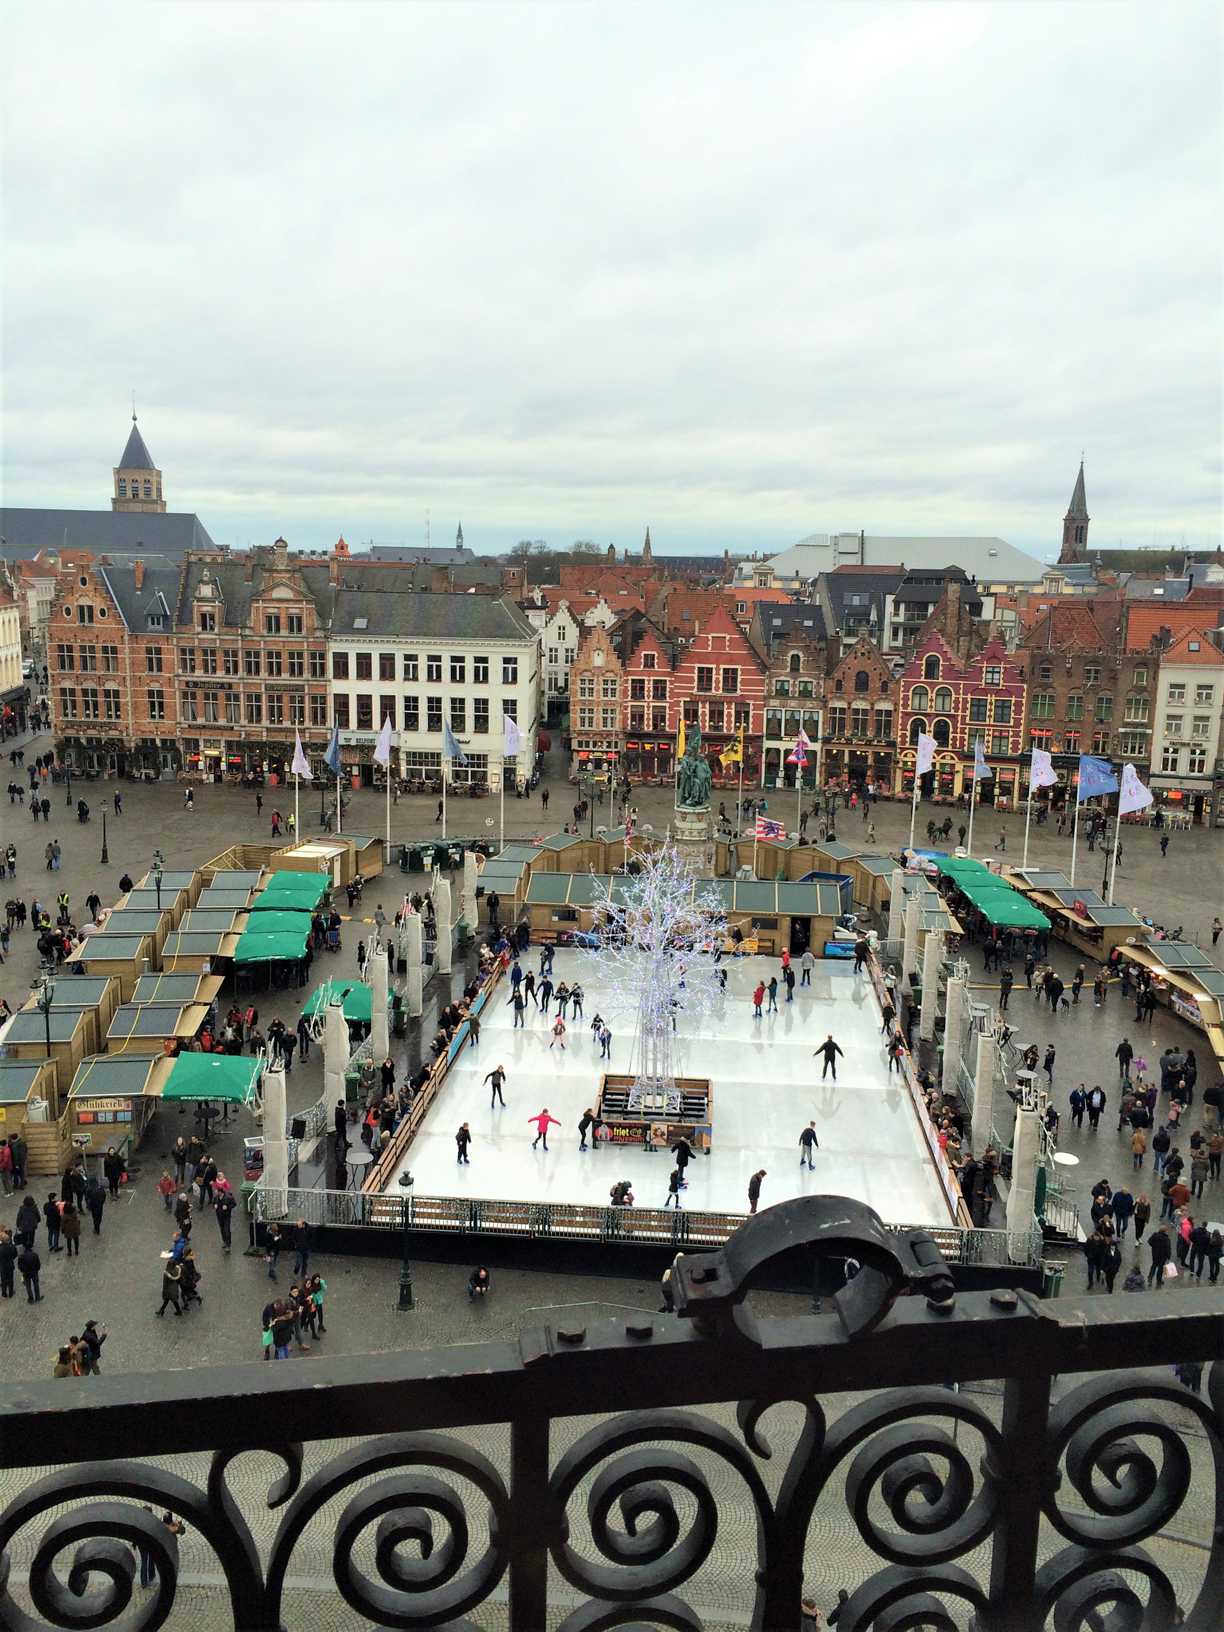 A picture of and ice rink and buildings in Markt in Bruges, Belgium, as seen from the belfry.